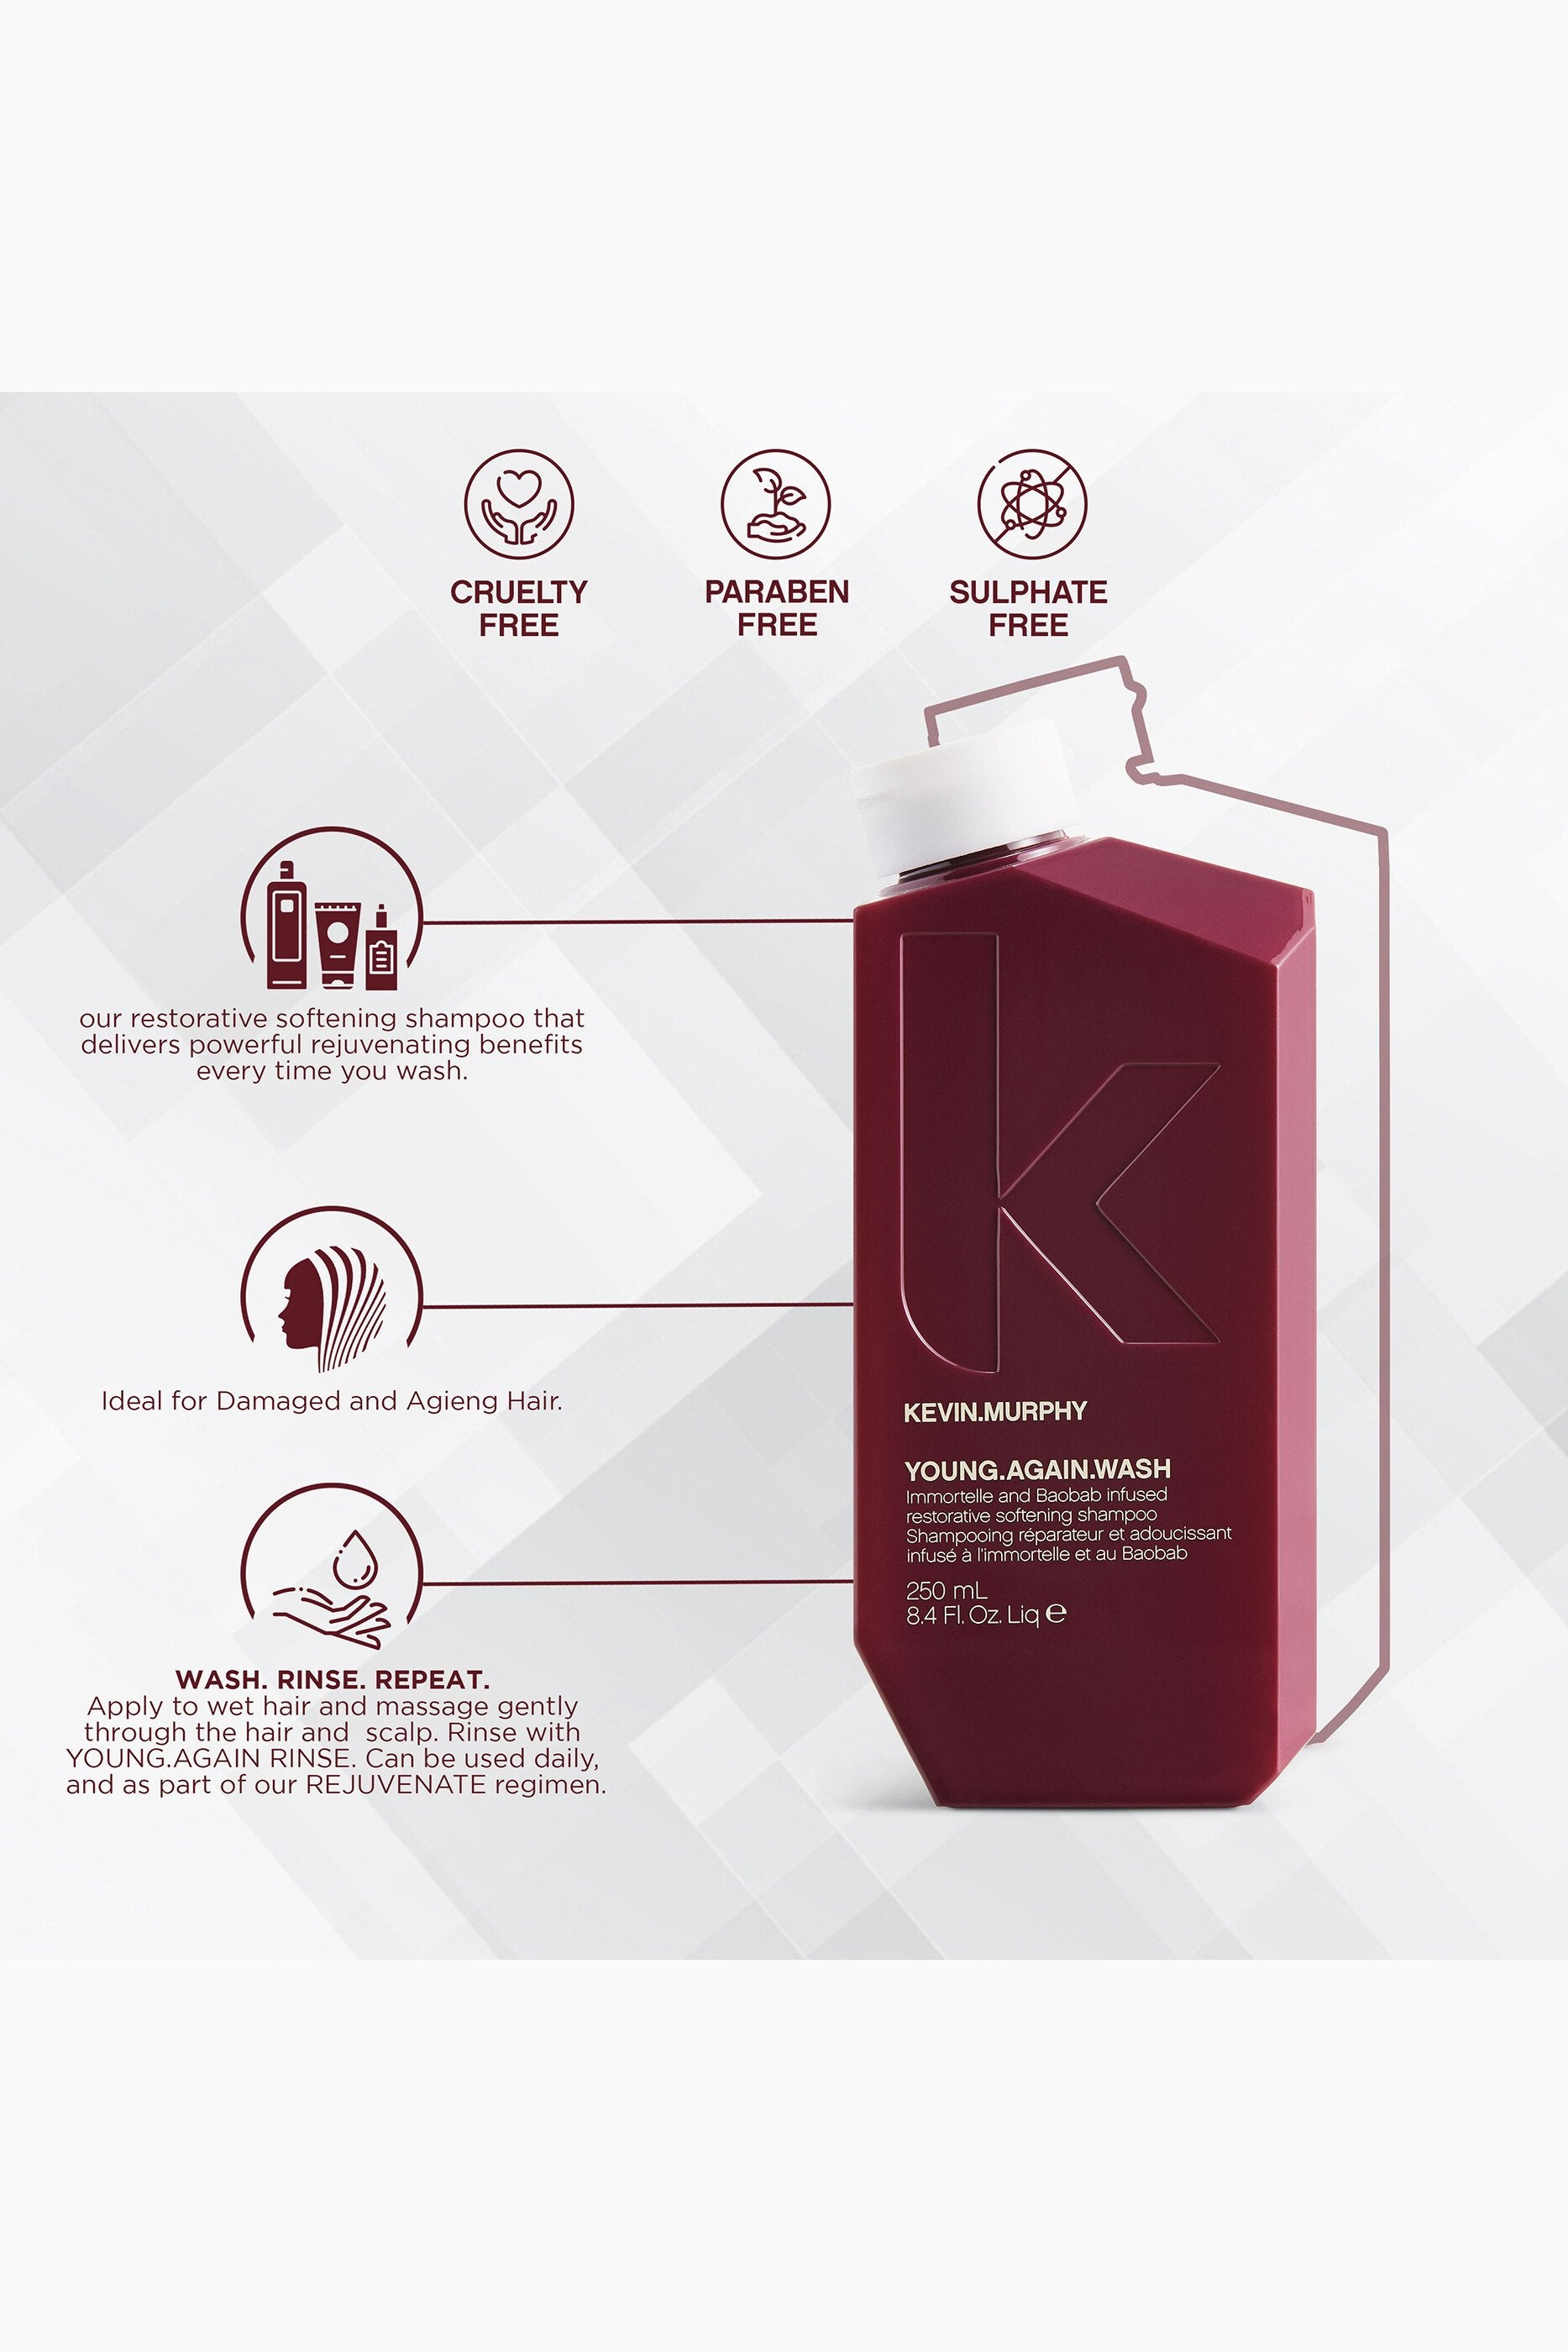 Kevin Murphy | YOUNG.AGAIN.WASH 250 ML